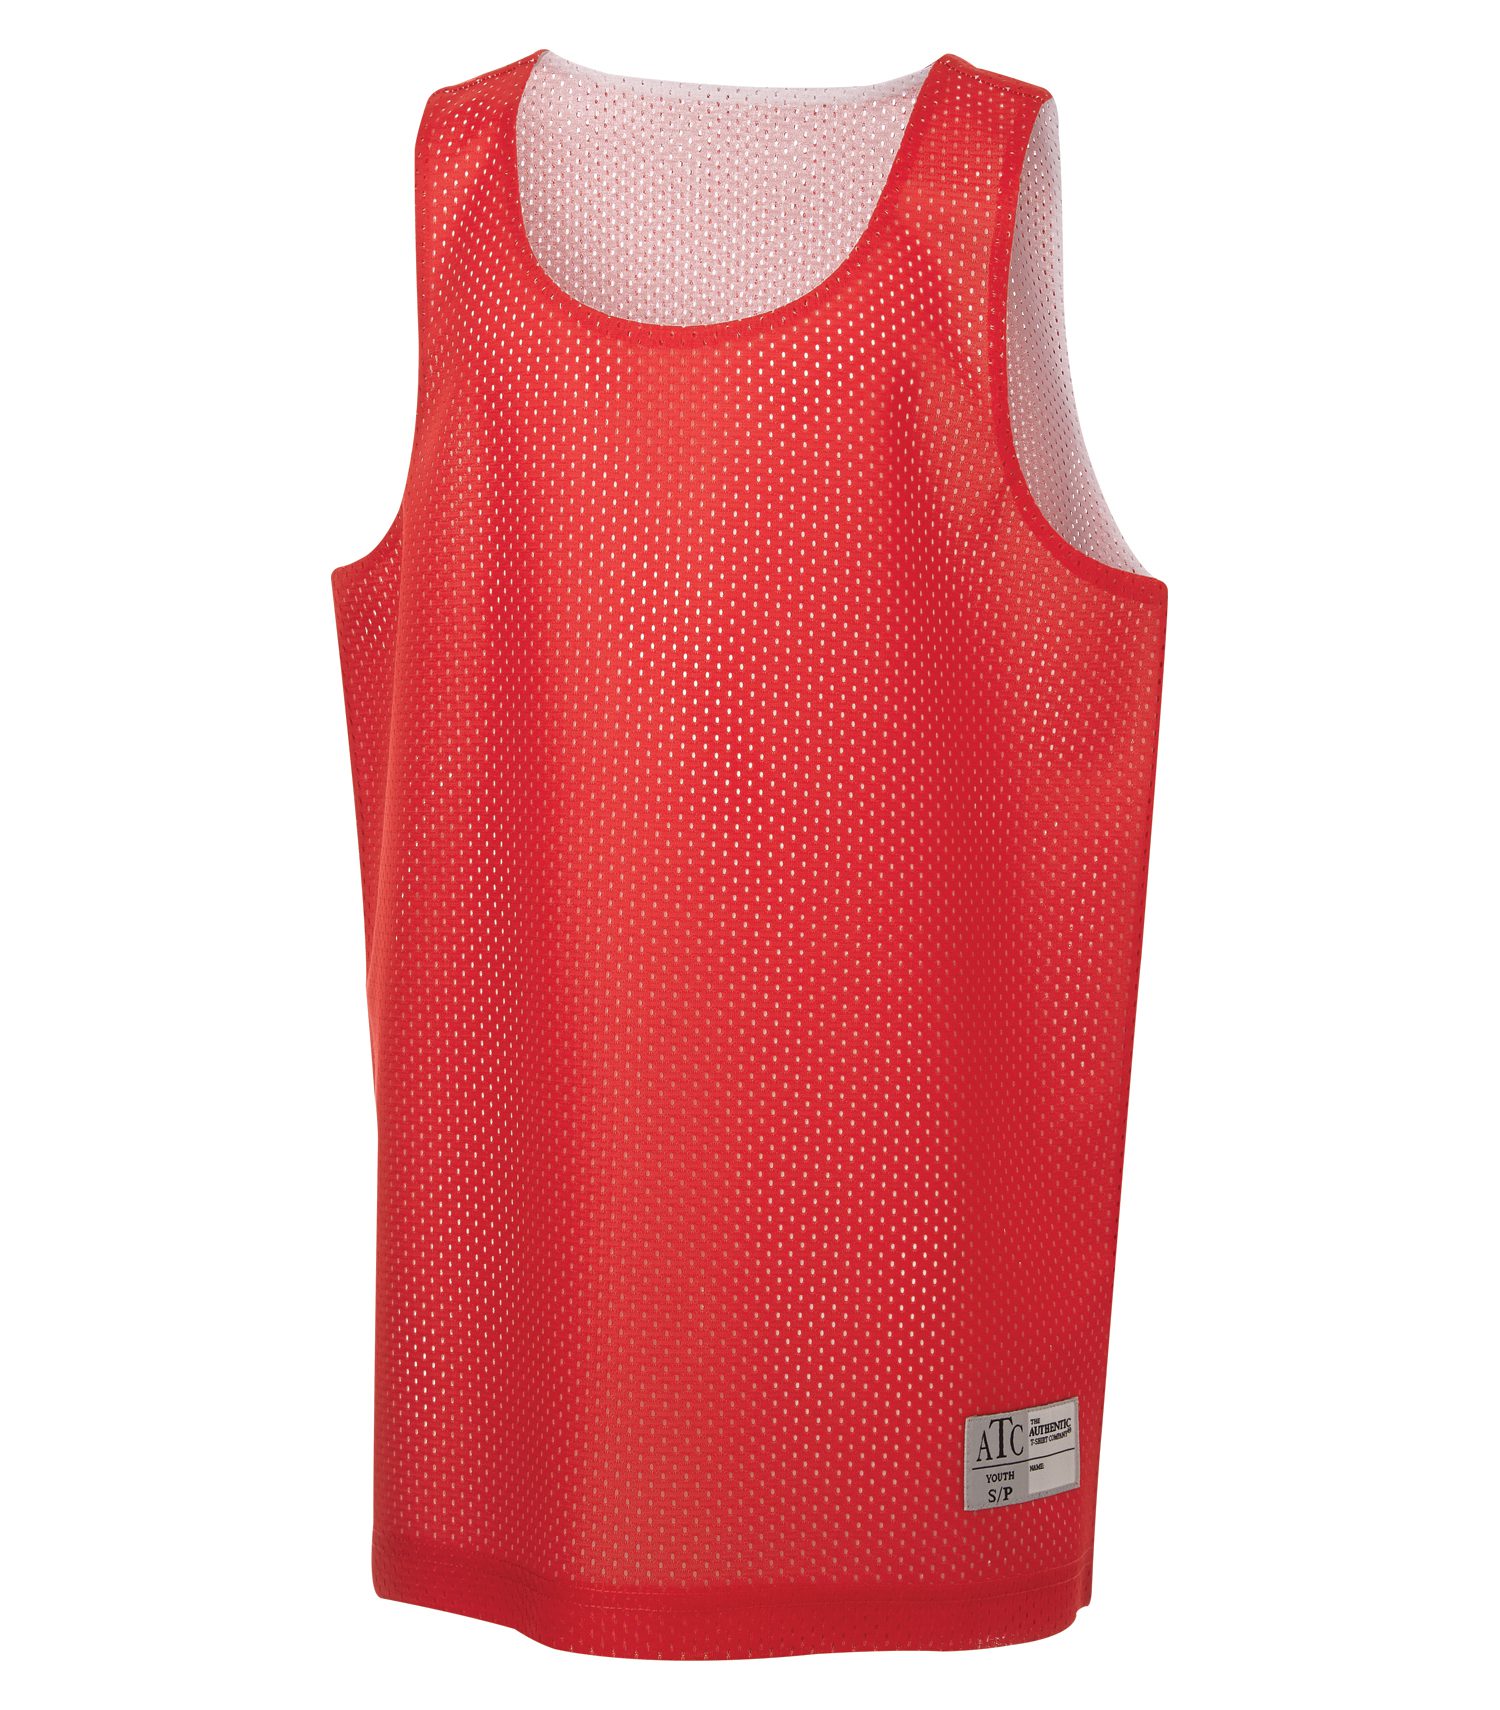 ATC™ PRO MESH REVERSIBLE YOUTH TANK TOP #Y3524 Red / White